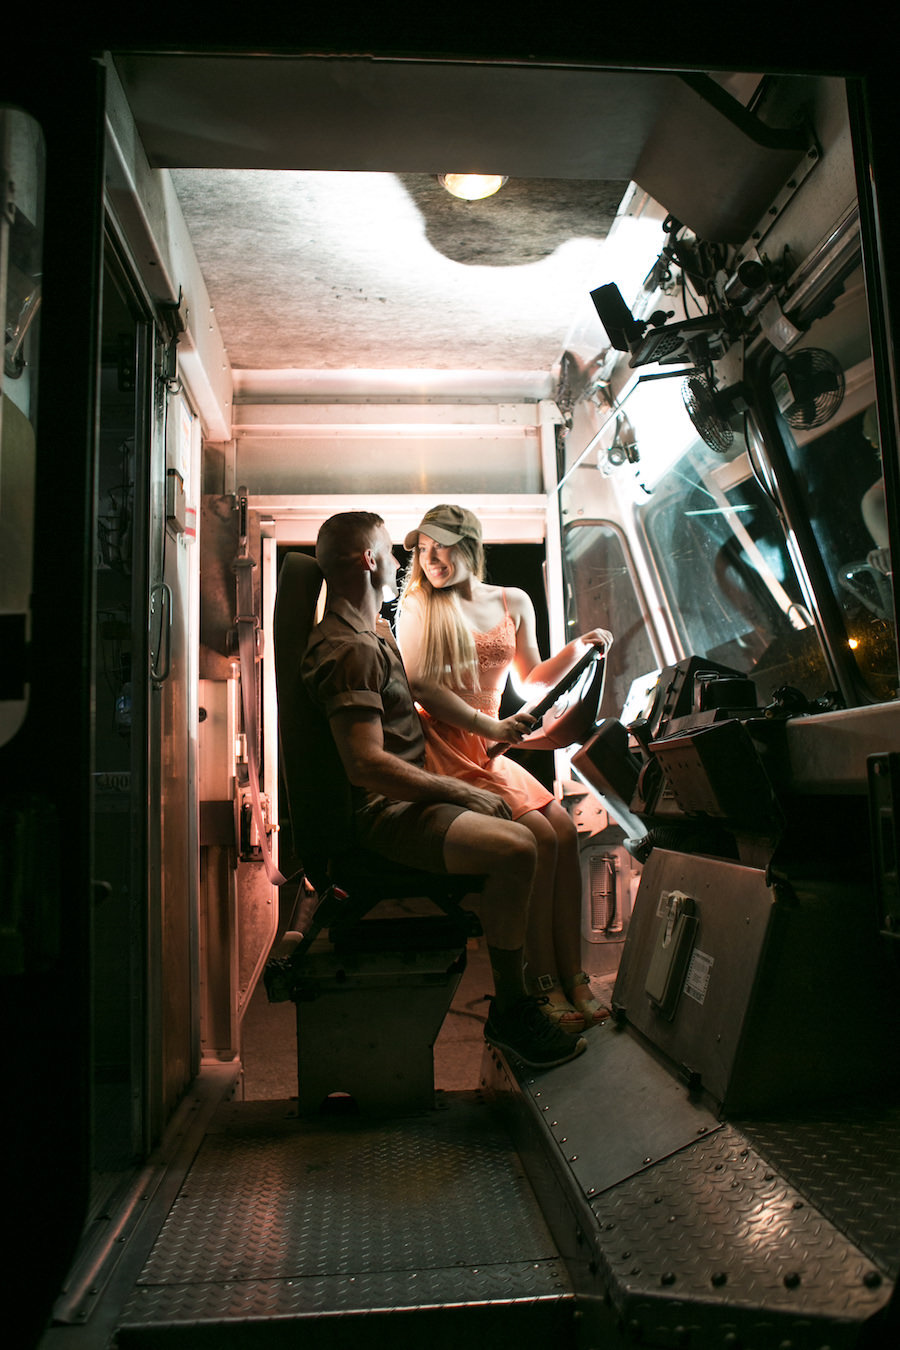 Fun and Playful Engagement Portrait Inside UPS Truck | Fiancé Works For UPS Engagement Shoot | Unique Engagement Session Ideas | Tampa Fl Wedding Photographer Carrie Wildes Photography